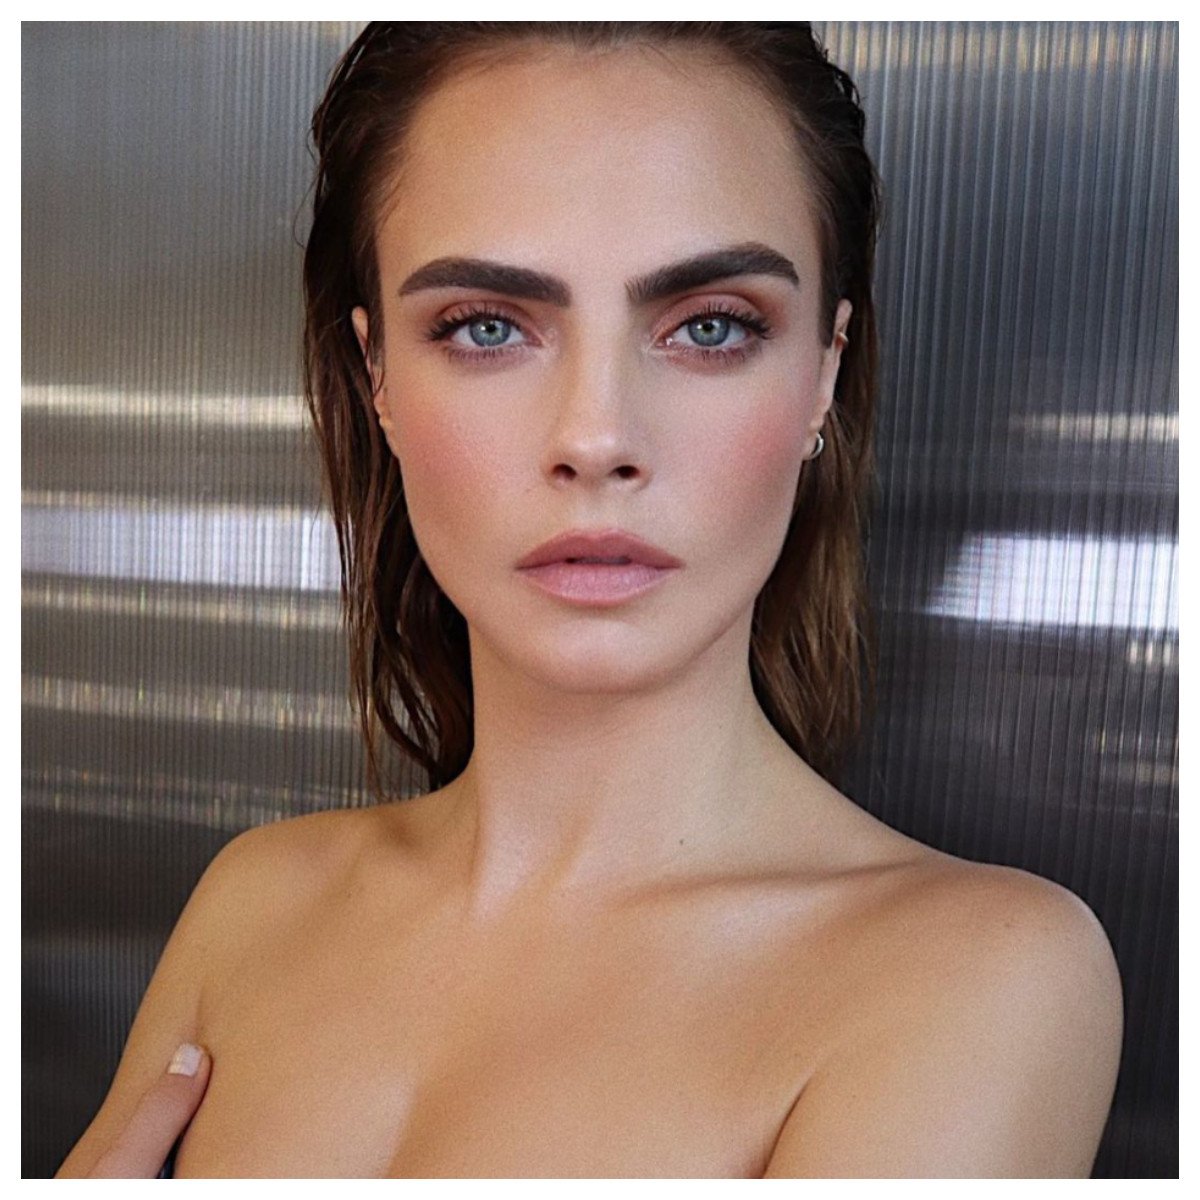 The woman who made thick eyebrows iconic: Cara Delevingne. Photo: @caradelevingne/Instagram